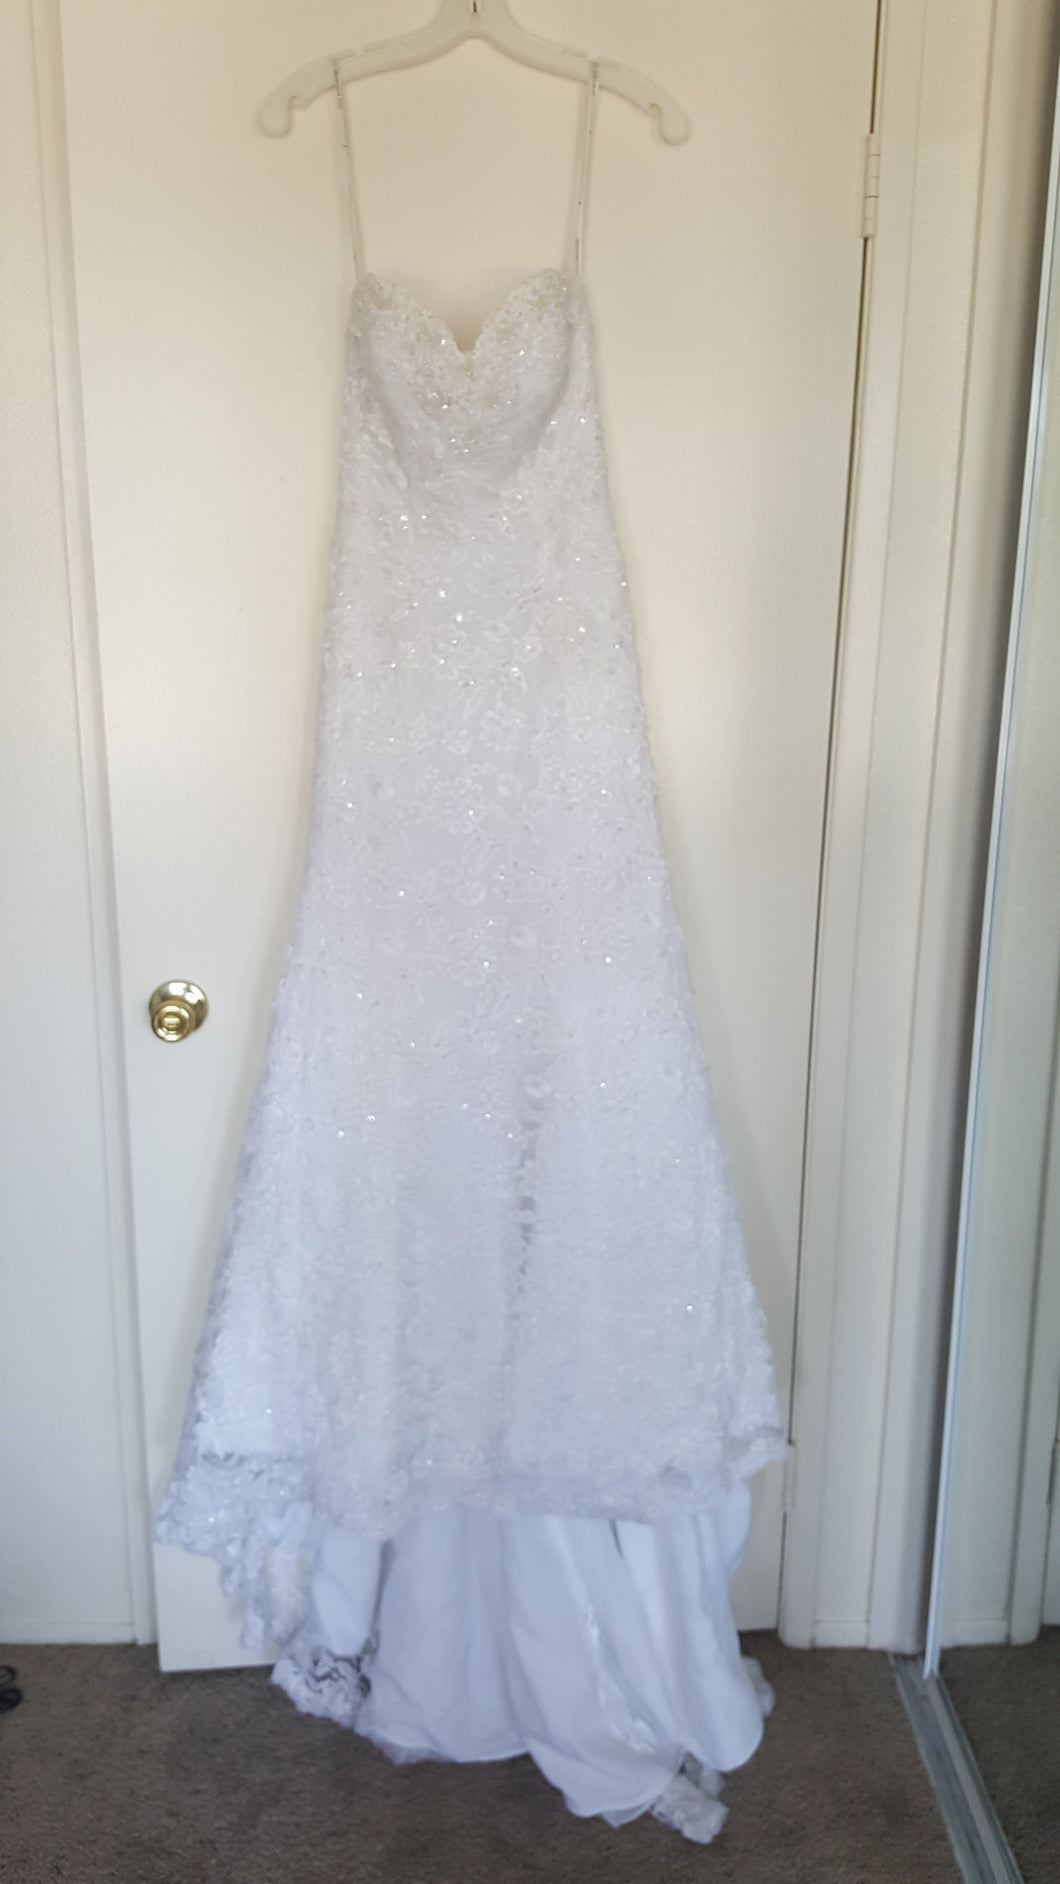 Monique Luo 'White Dress' size 2 new wedding dress front view on hanger